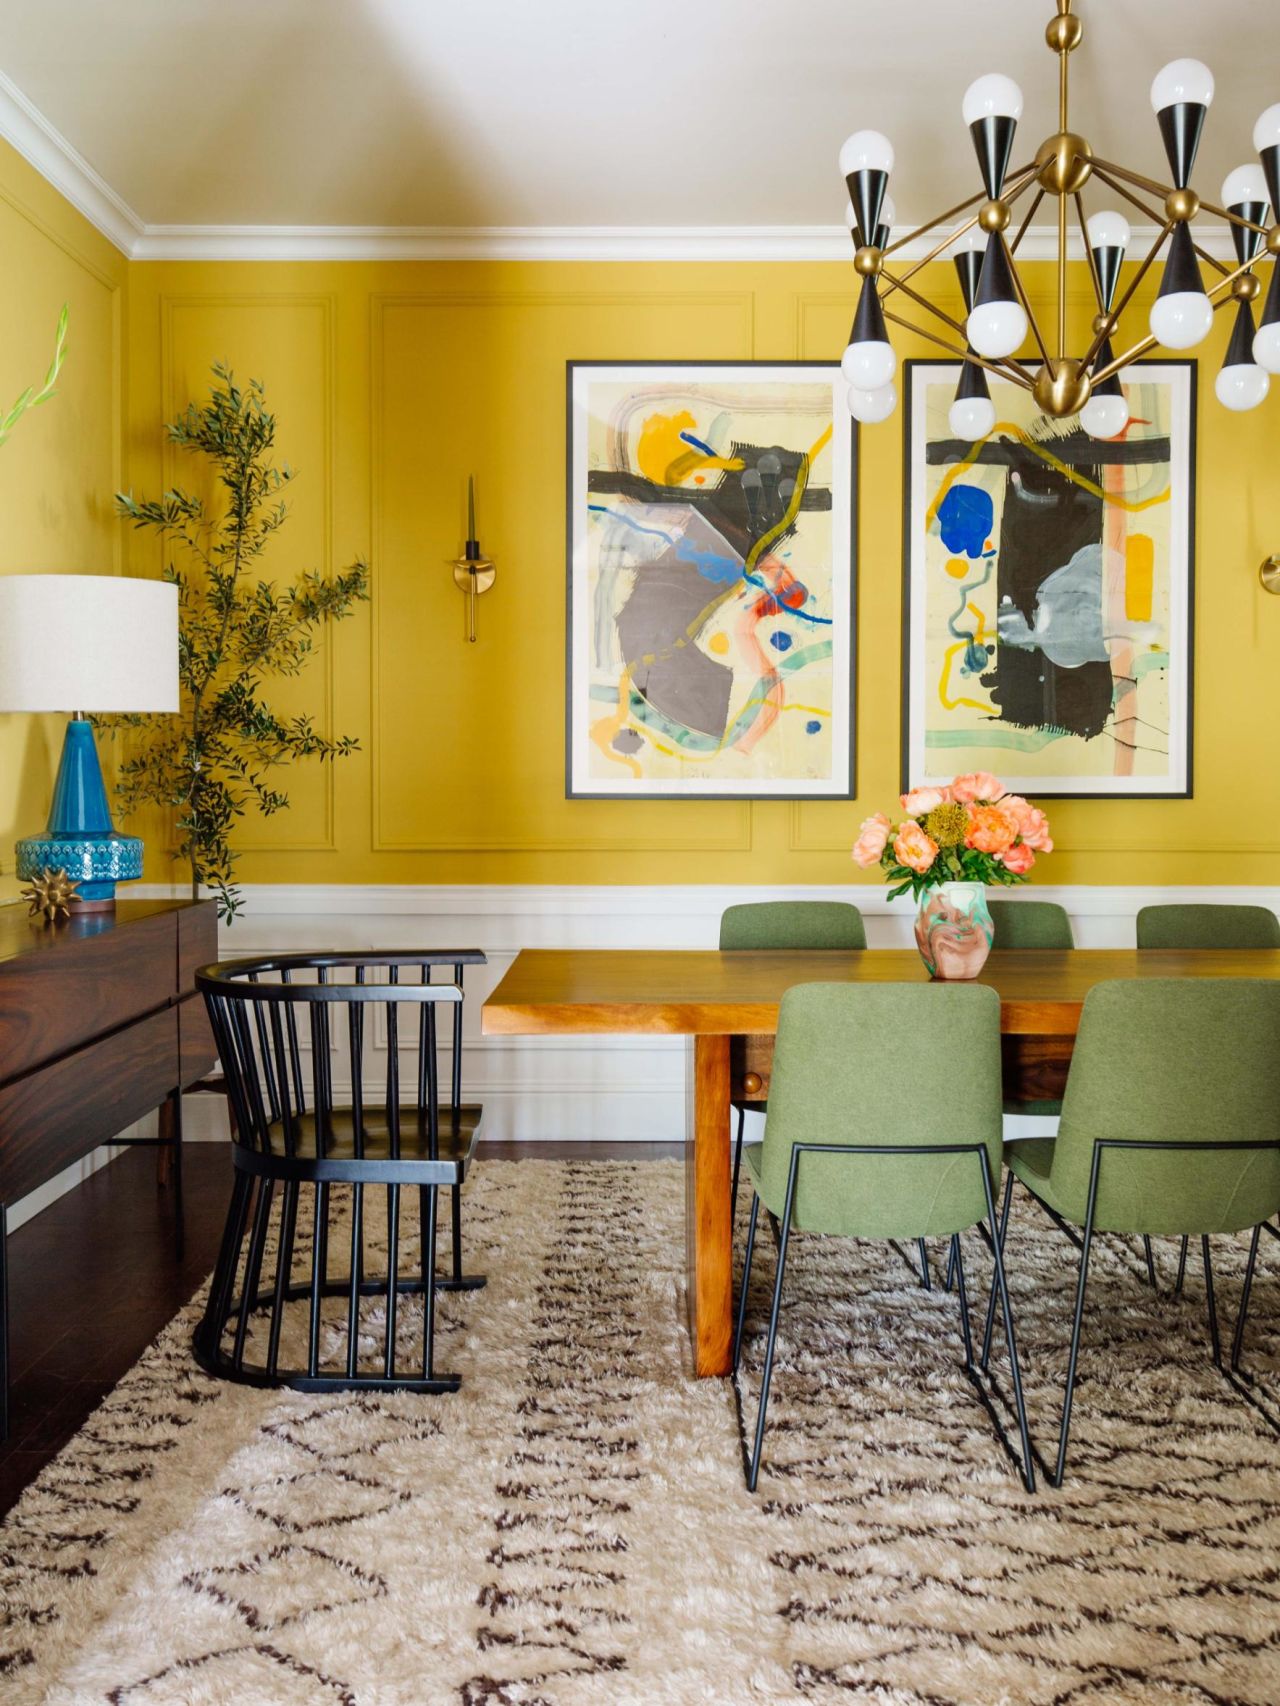 Warmer tones, like yellow, can be energizing.